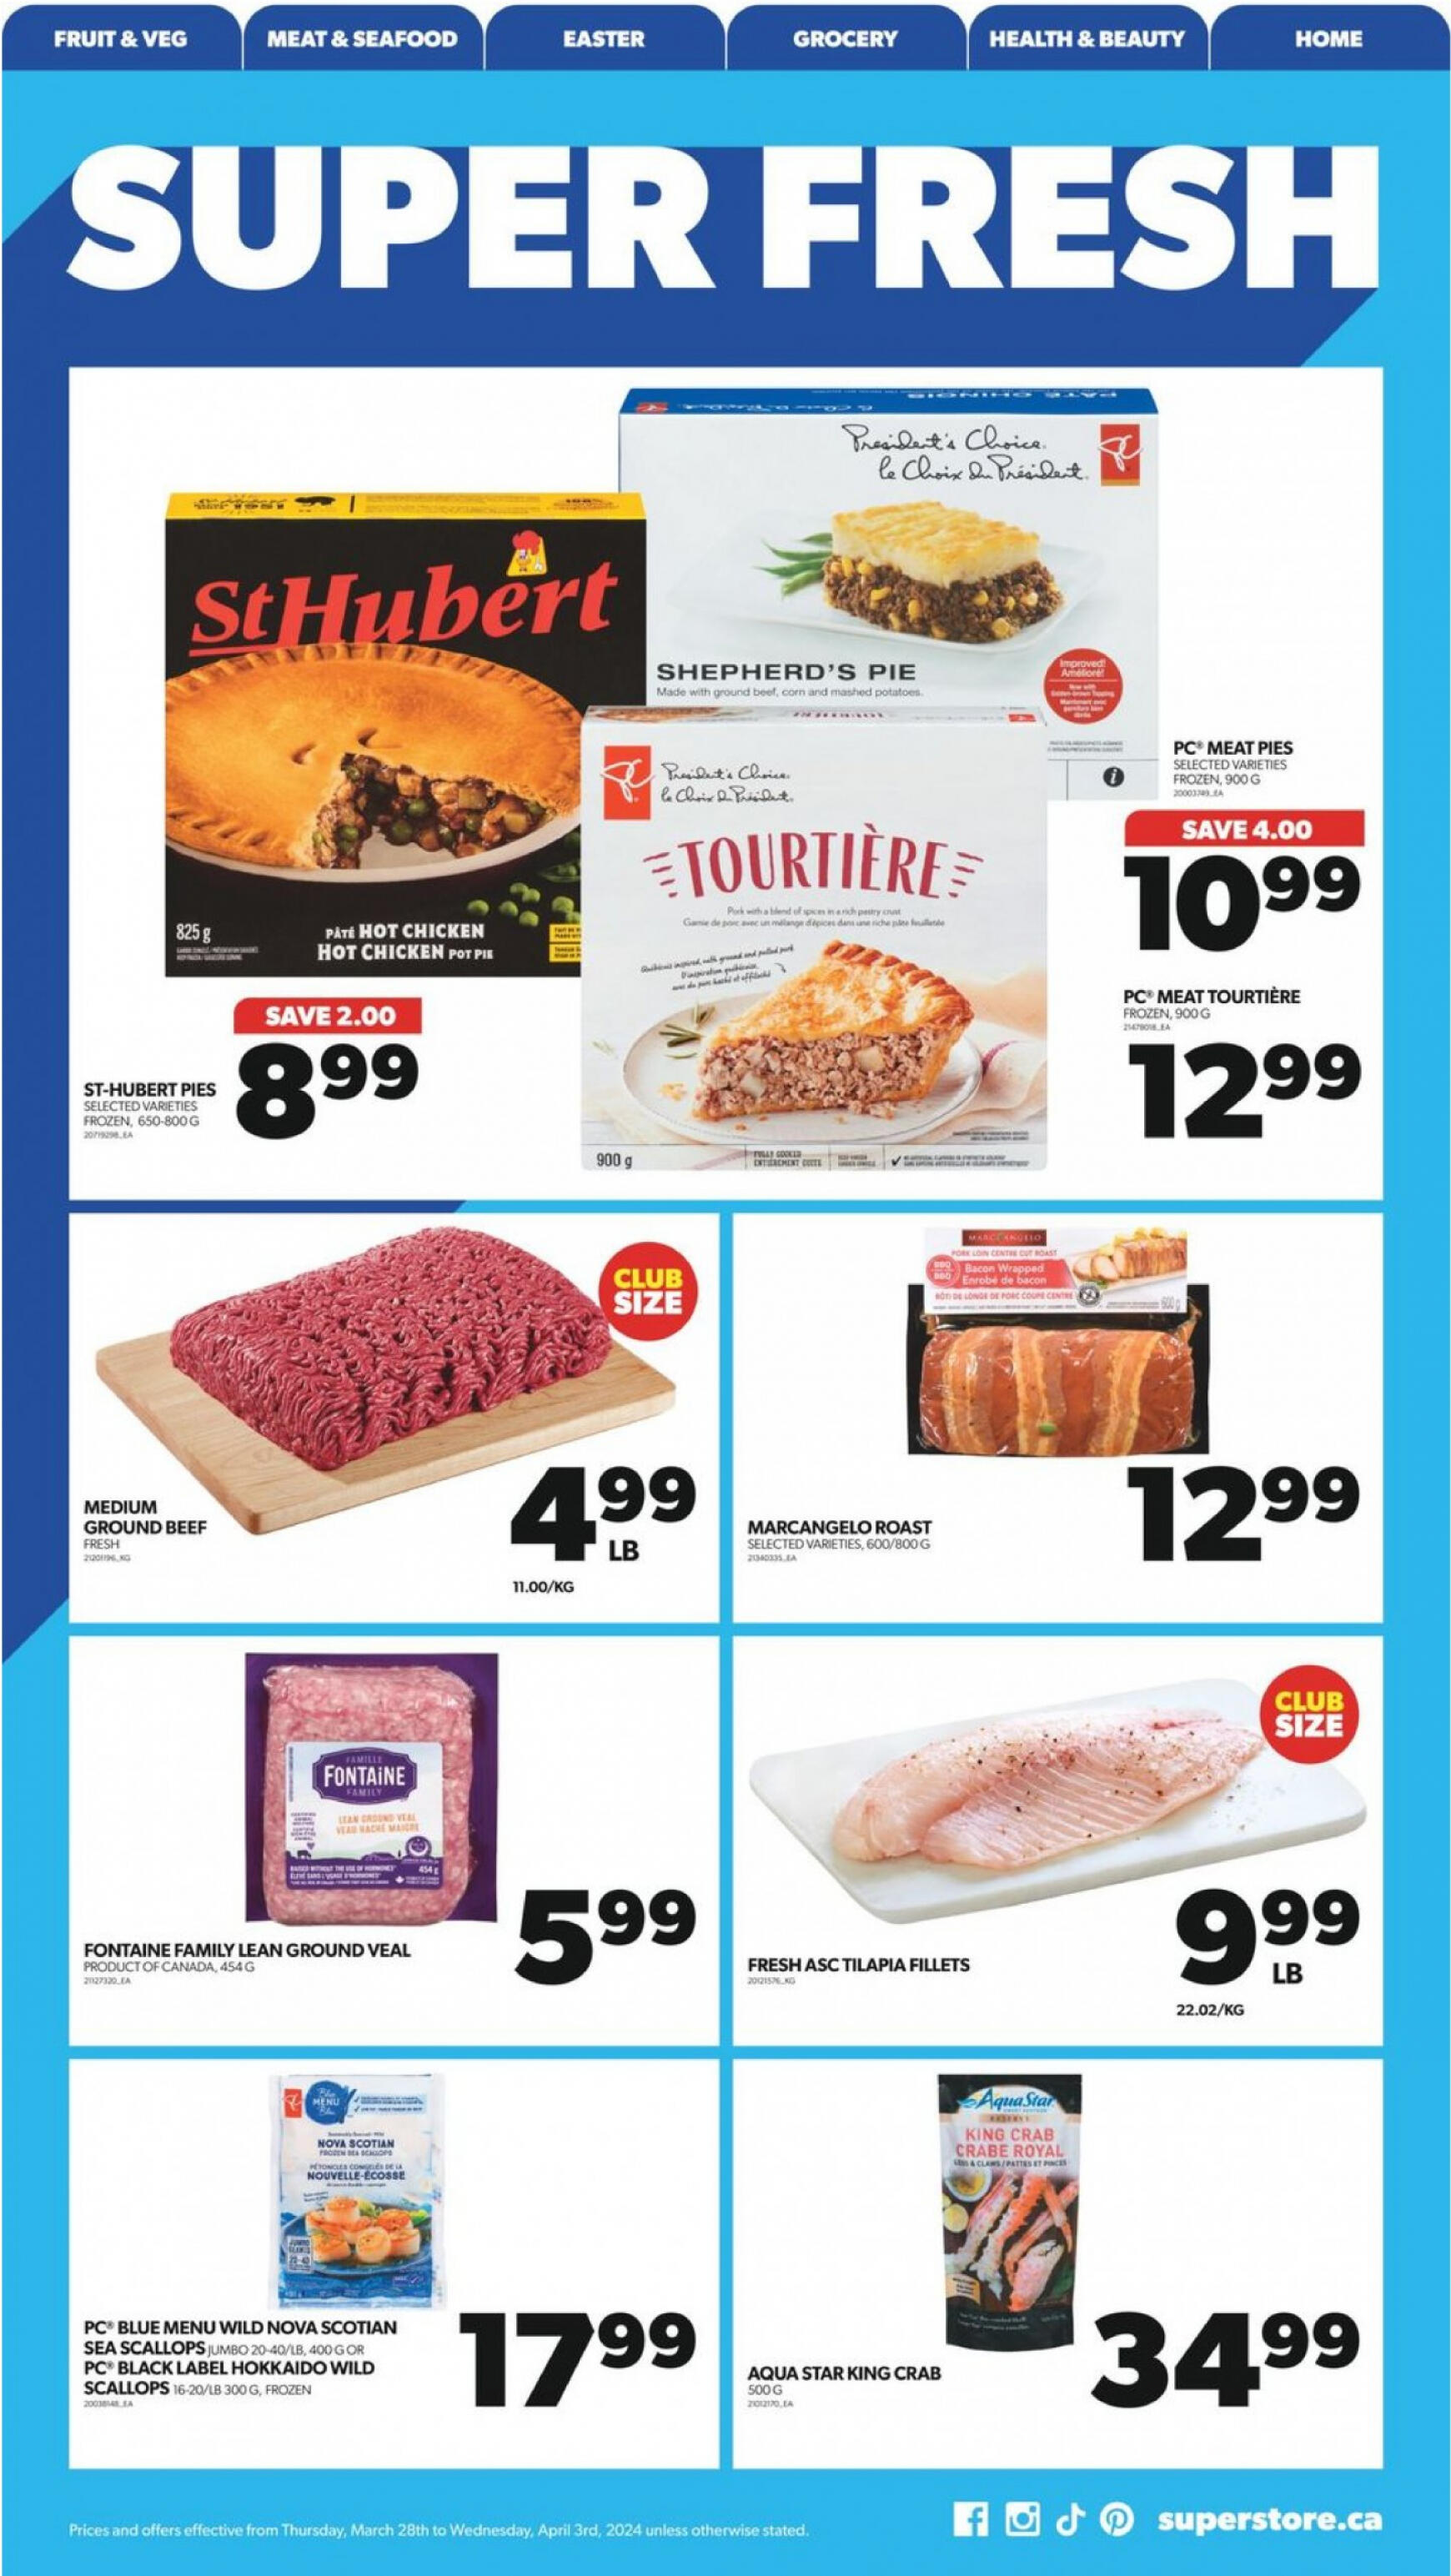 real-canadian-superstore - Real Canadian Superstore flyer current 28.03. - 03.04. - page: 13